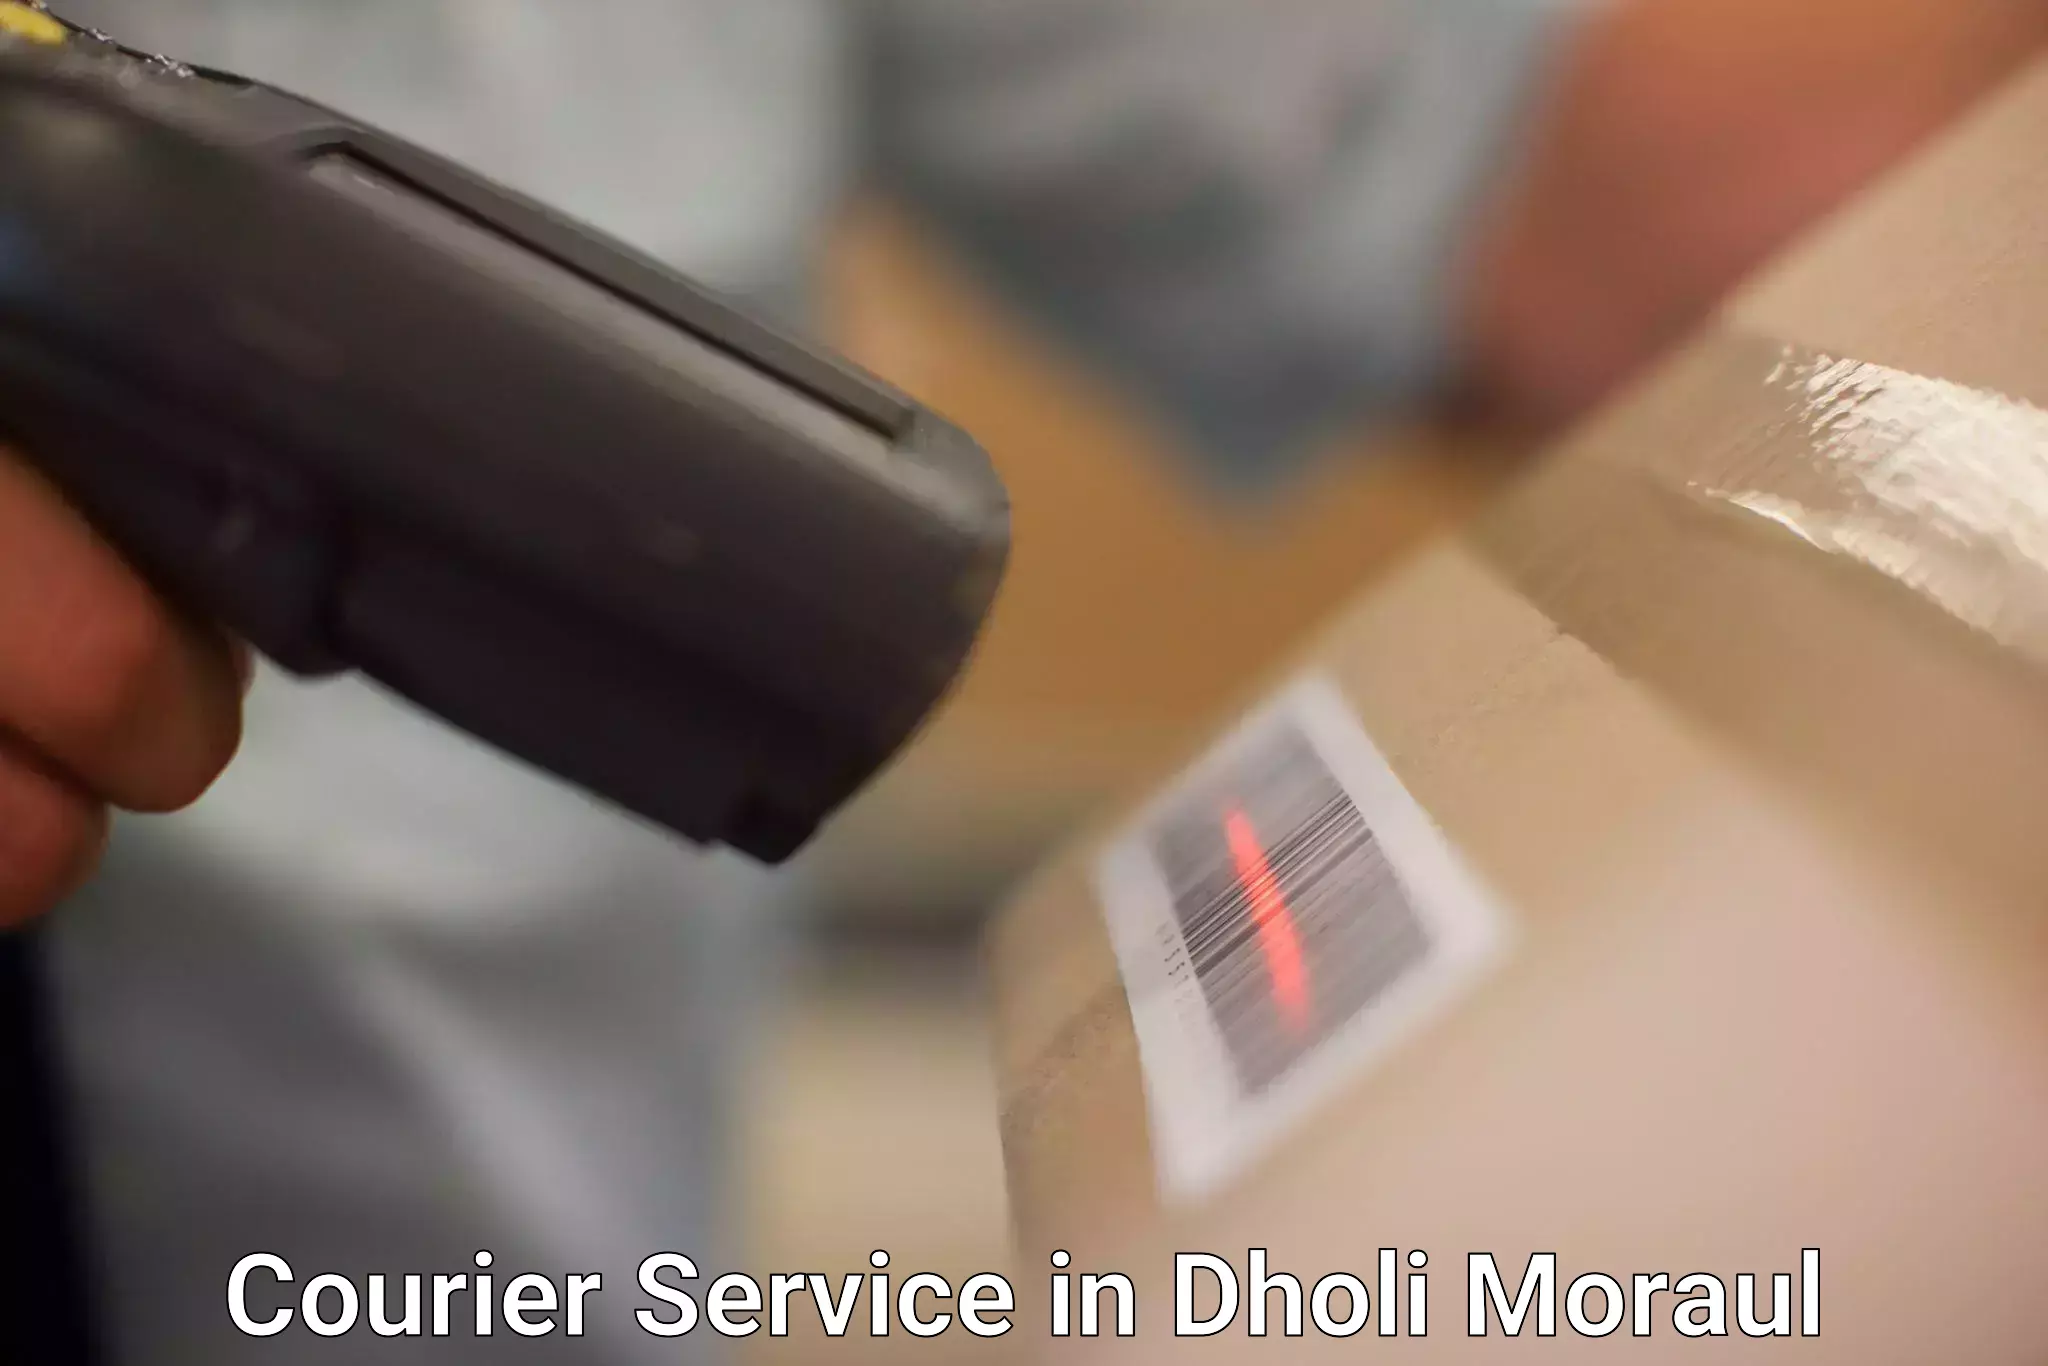 Next-day freight services in Dholi Moraul